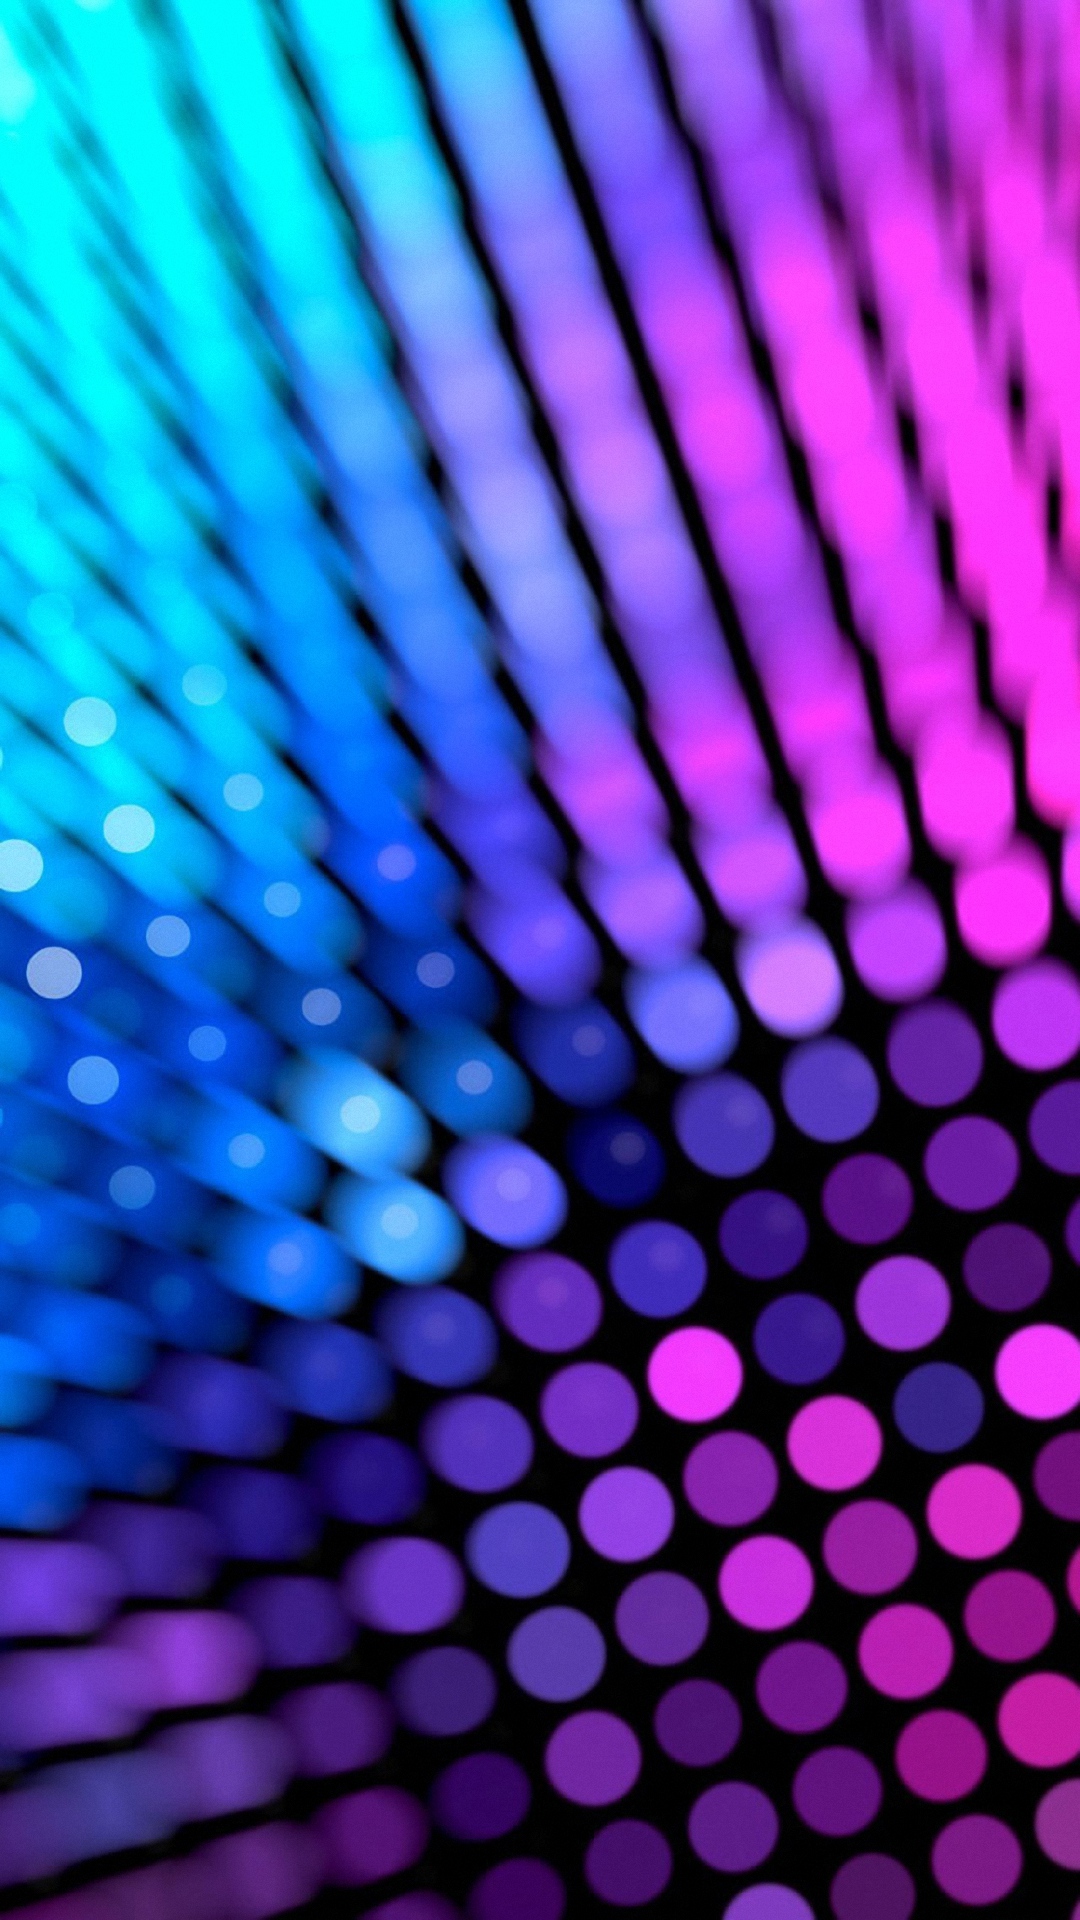  49 Cool Neon  Wallpapers  for iPhone  on WallpaperSafari